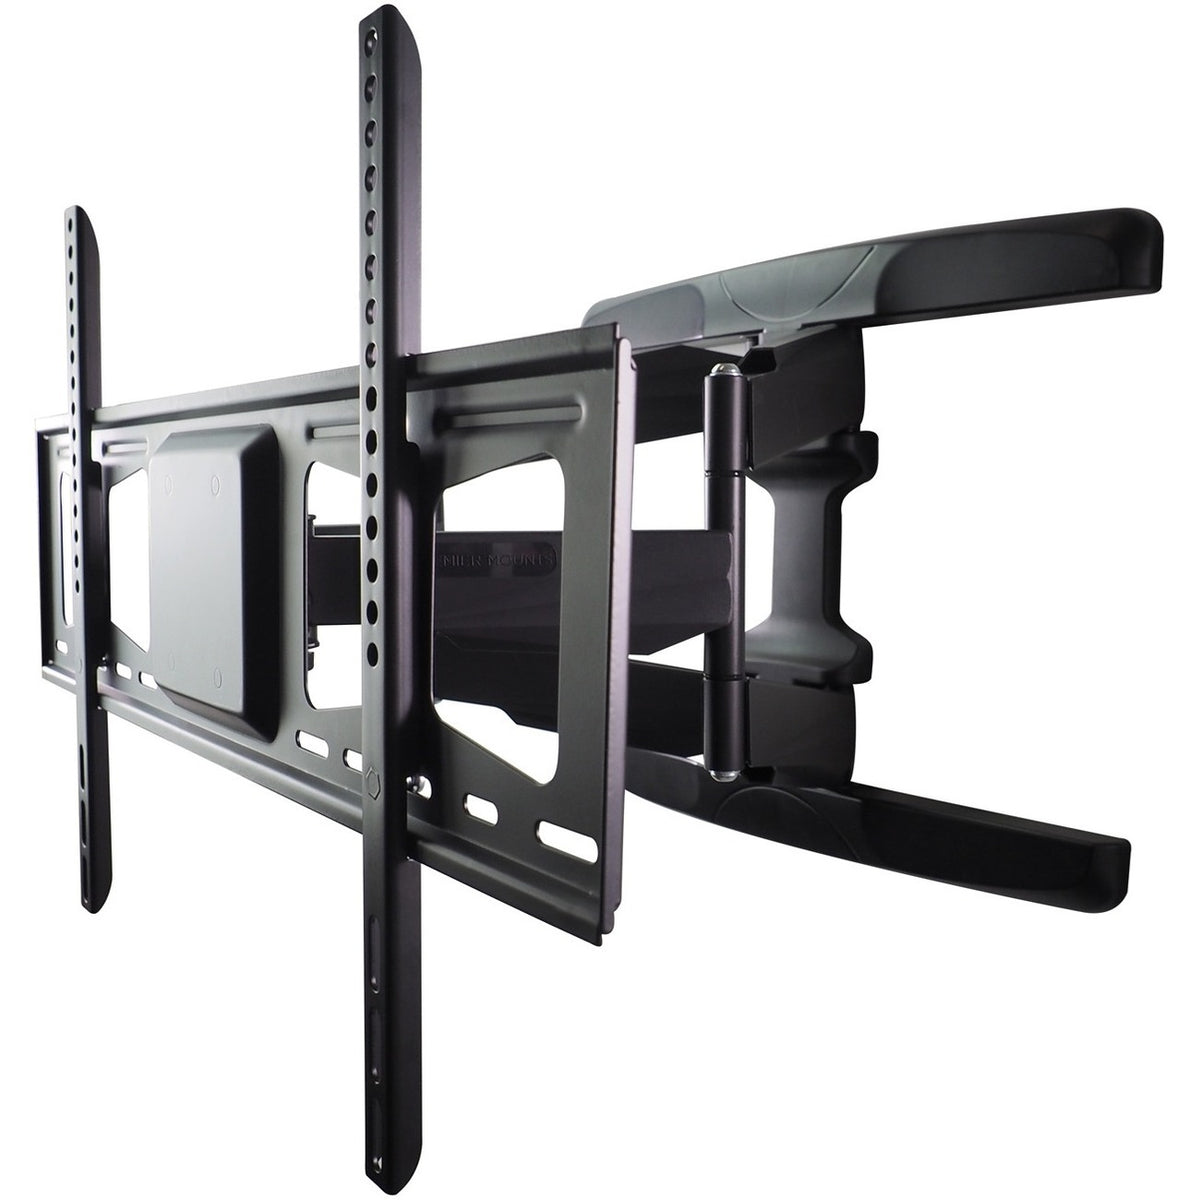 Premier Mounts AM95 Wall Mount for TV, Monitor - Black - AM95